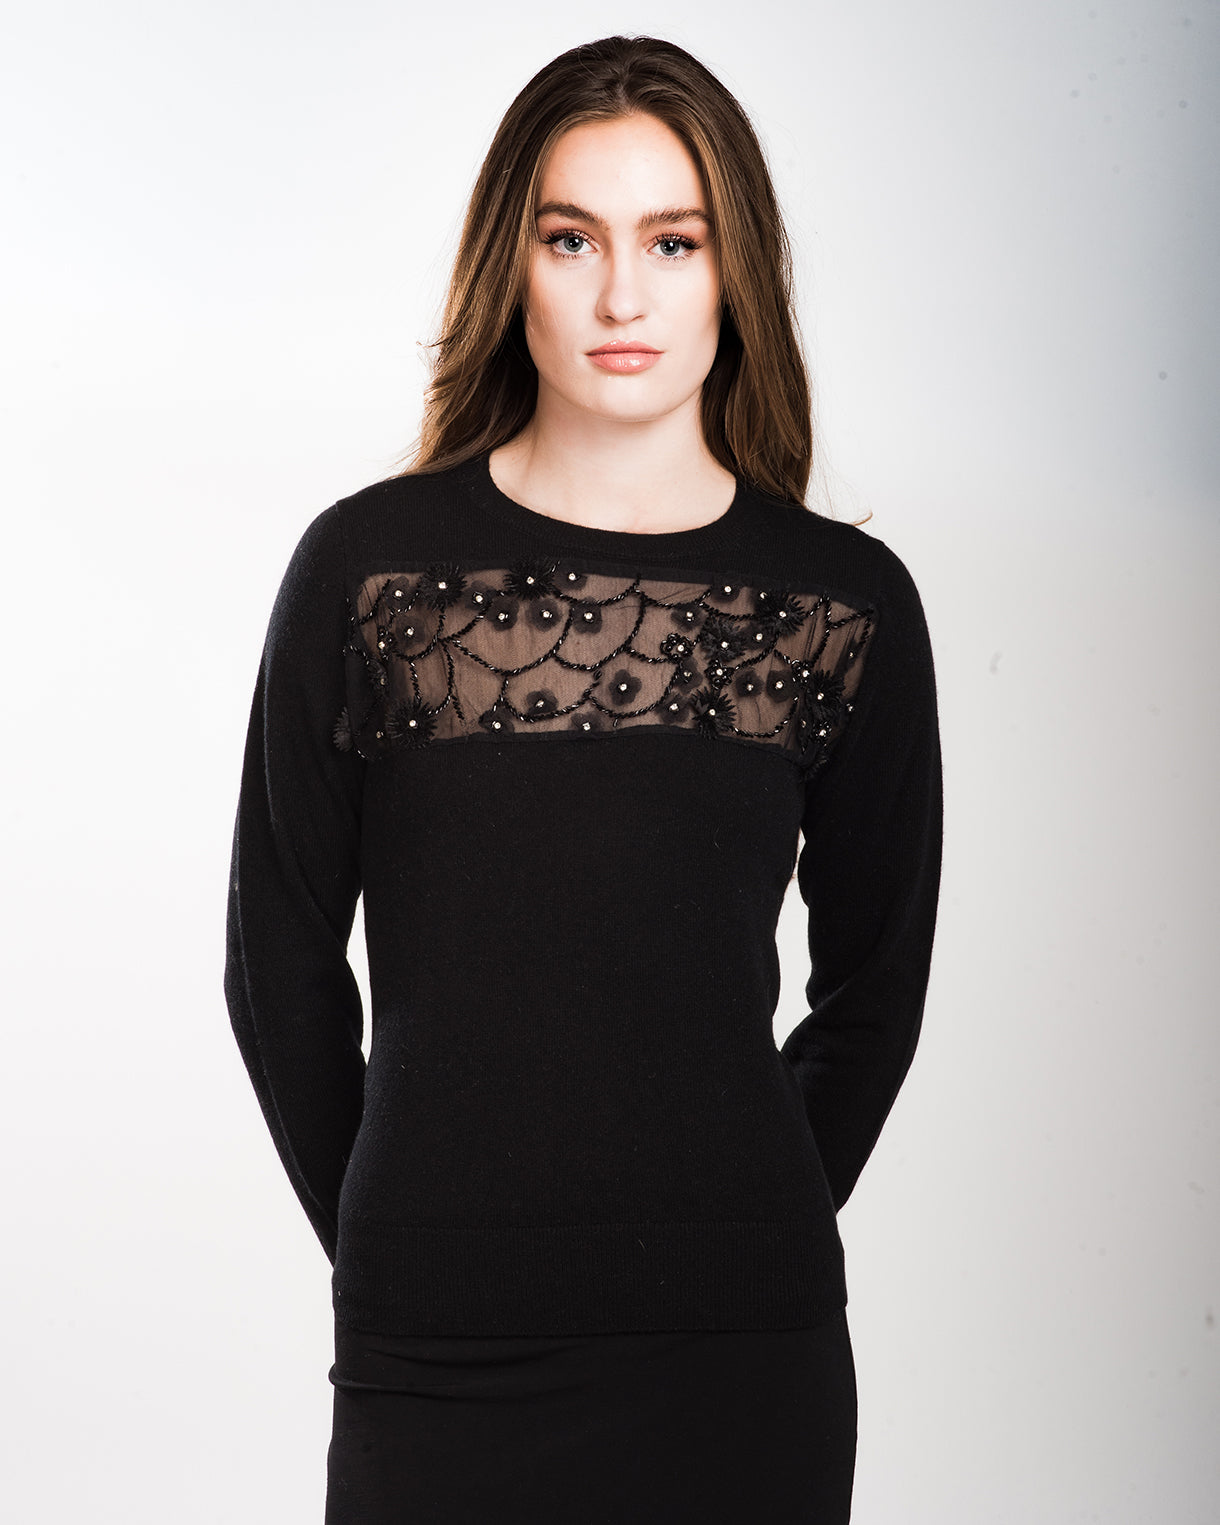 SMALL BLACK LONG SLEEVE CREW NECK CASHMERE PEAKABOO SWEATER WITH BLACK 3D FLOWERS, CRYSTALS AND JET BEADING ON BLACK TULLE WITH BLACK SILK ORGANZA LINING